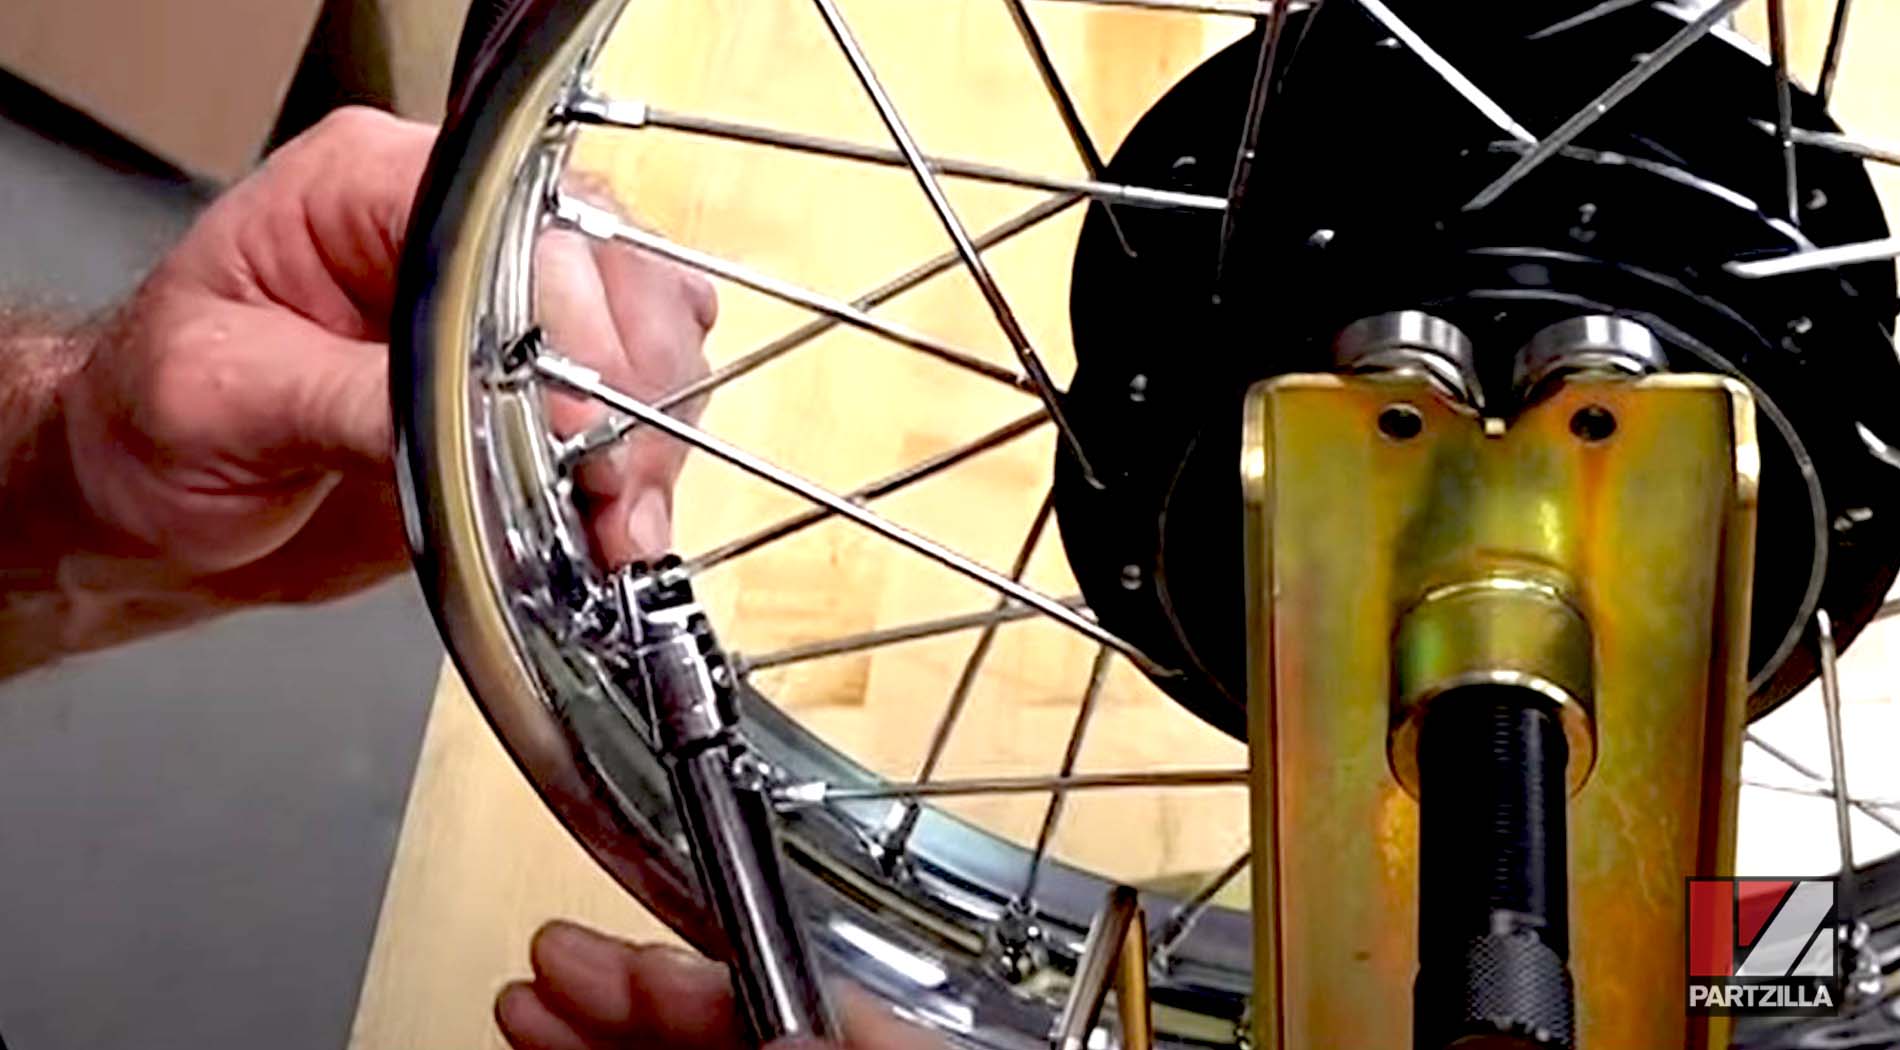 How to straighten a motorcycle wheel